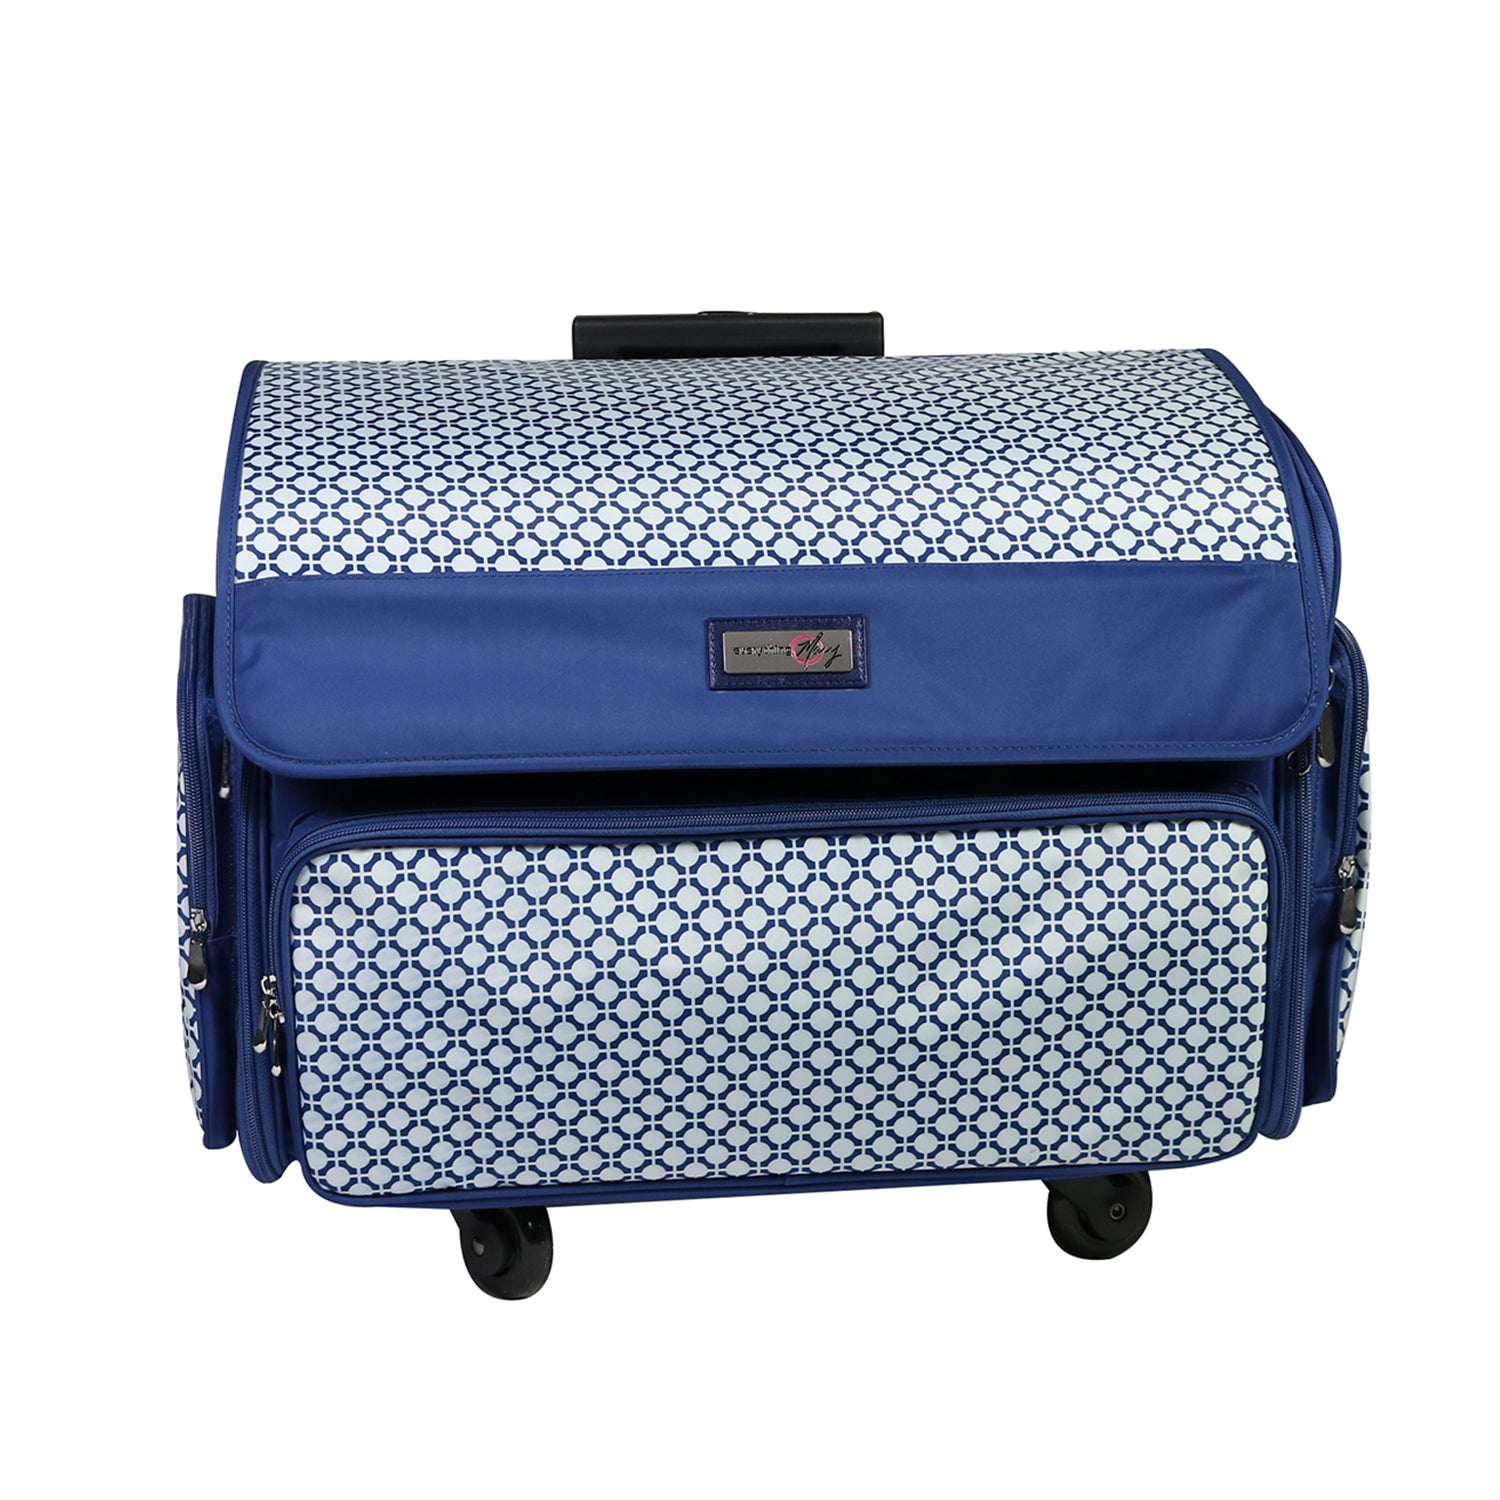 Brand new! Sewing machine carry/storage case - arts & crafts - by